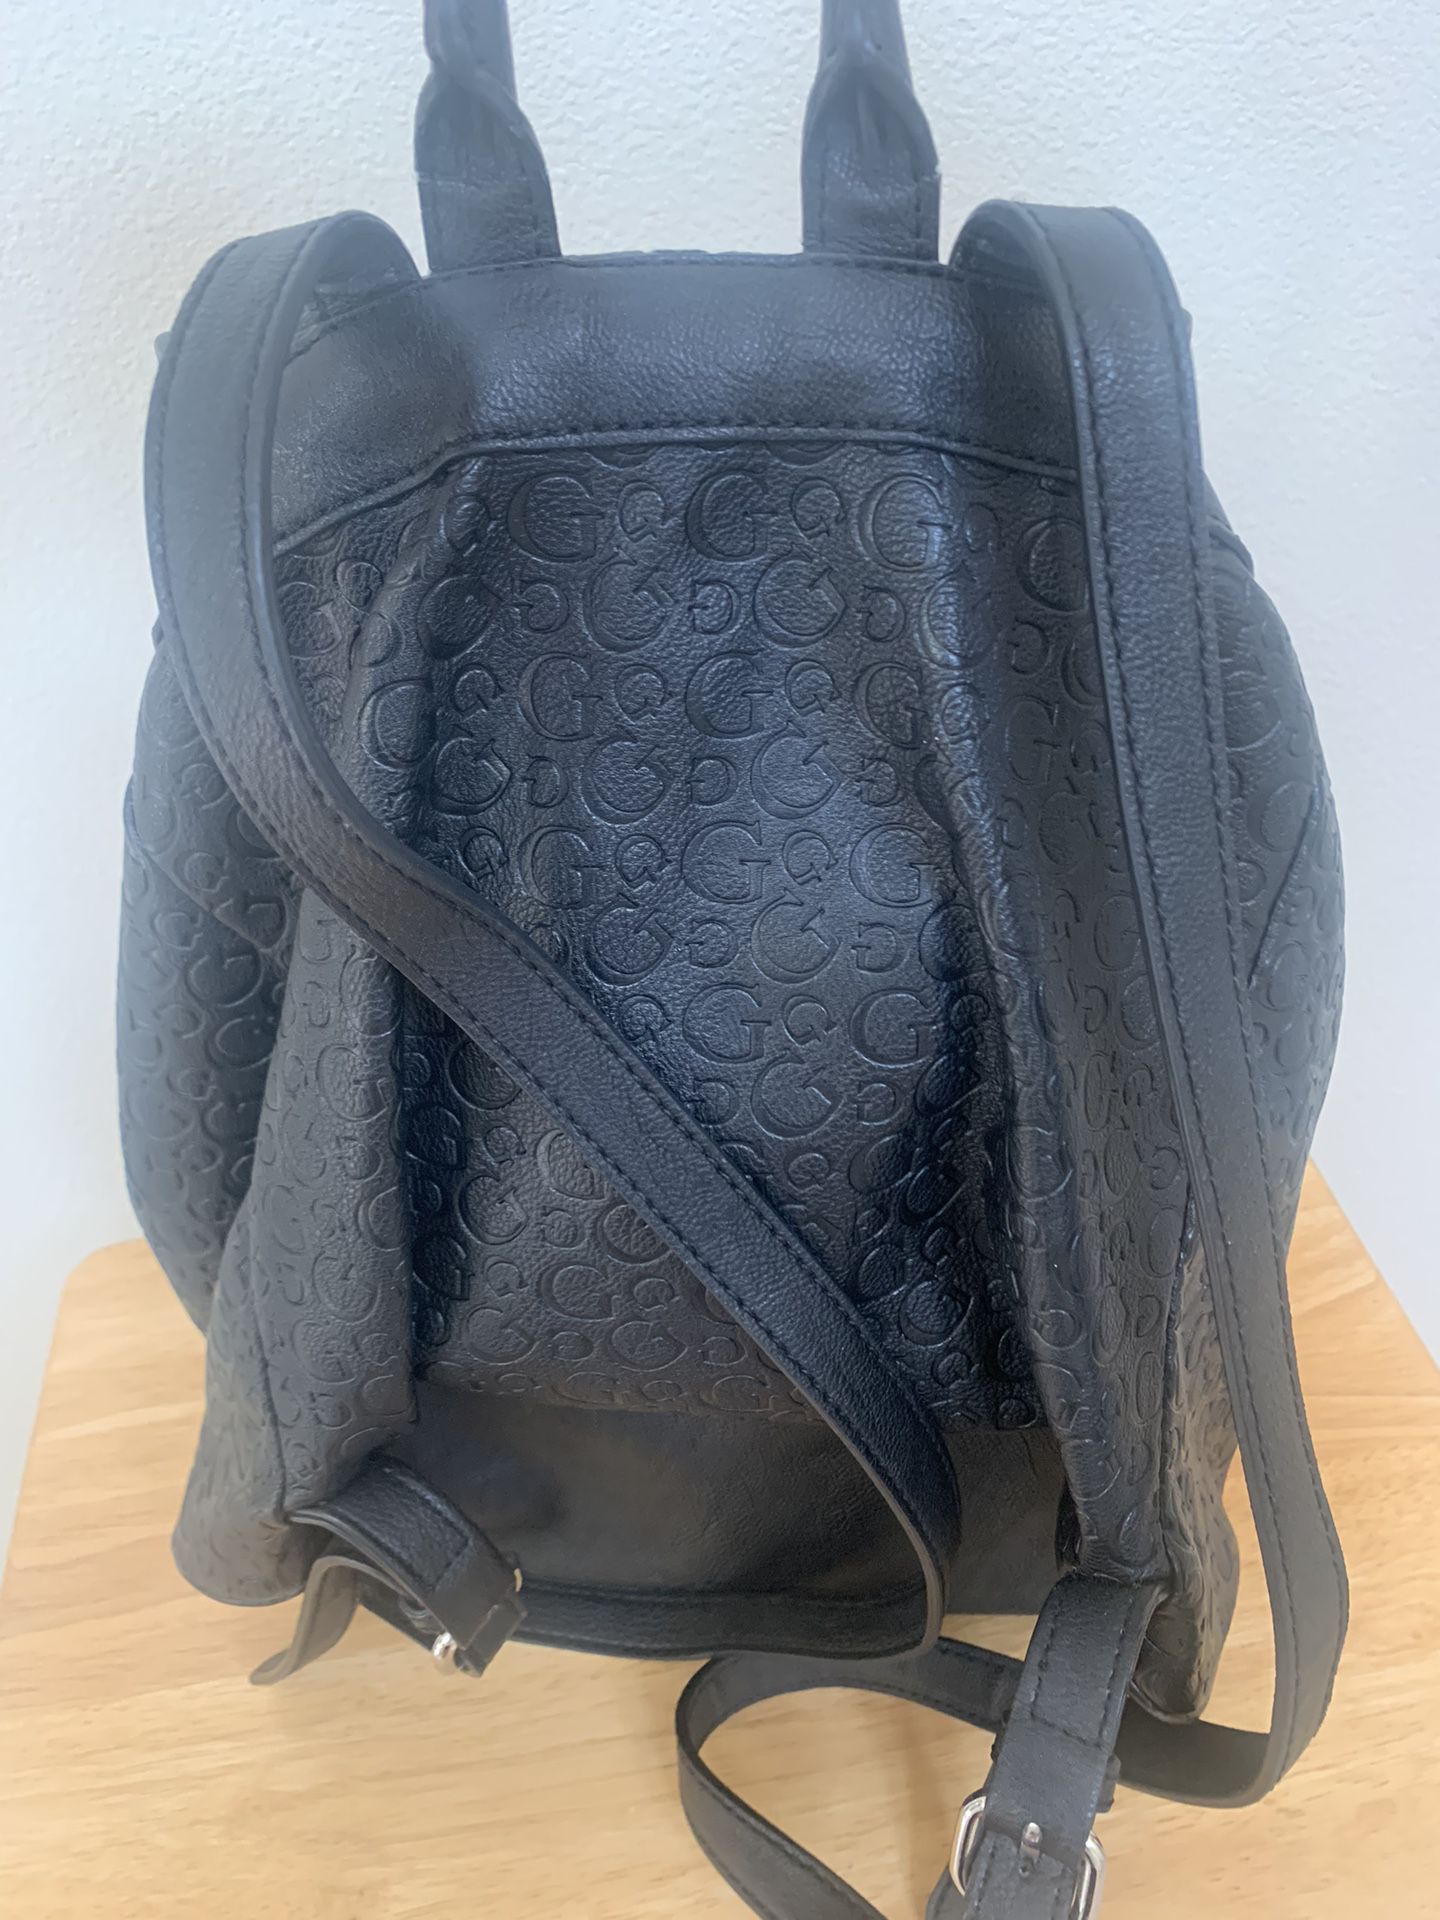 Backpack for Sale in Victorville, CA - OfferUp